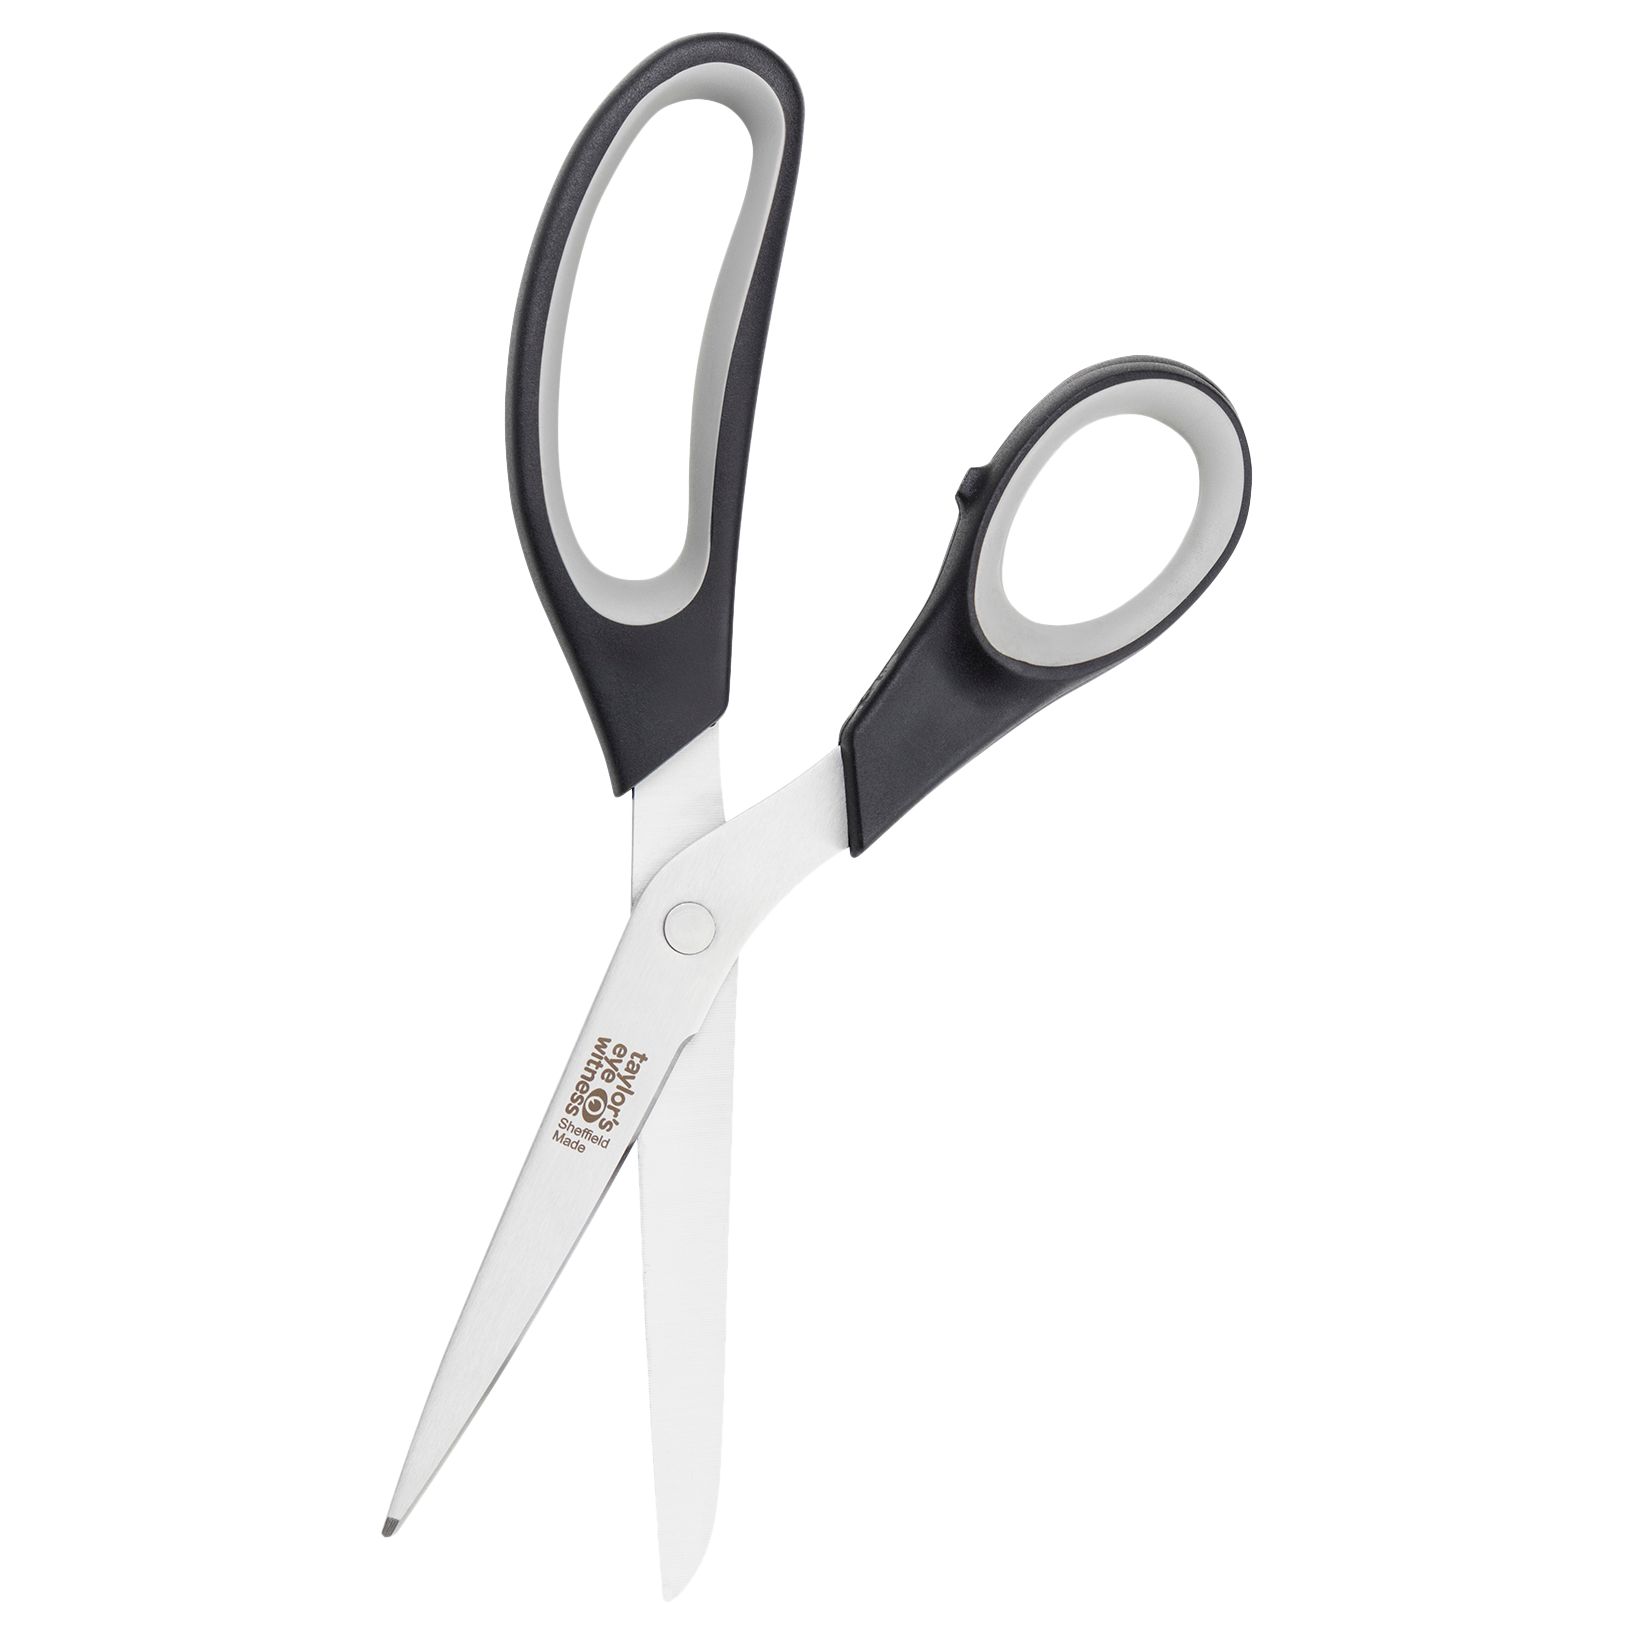 Taylor's Eye Witness Left Handed Craft Scissors Review